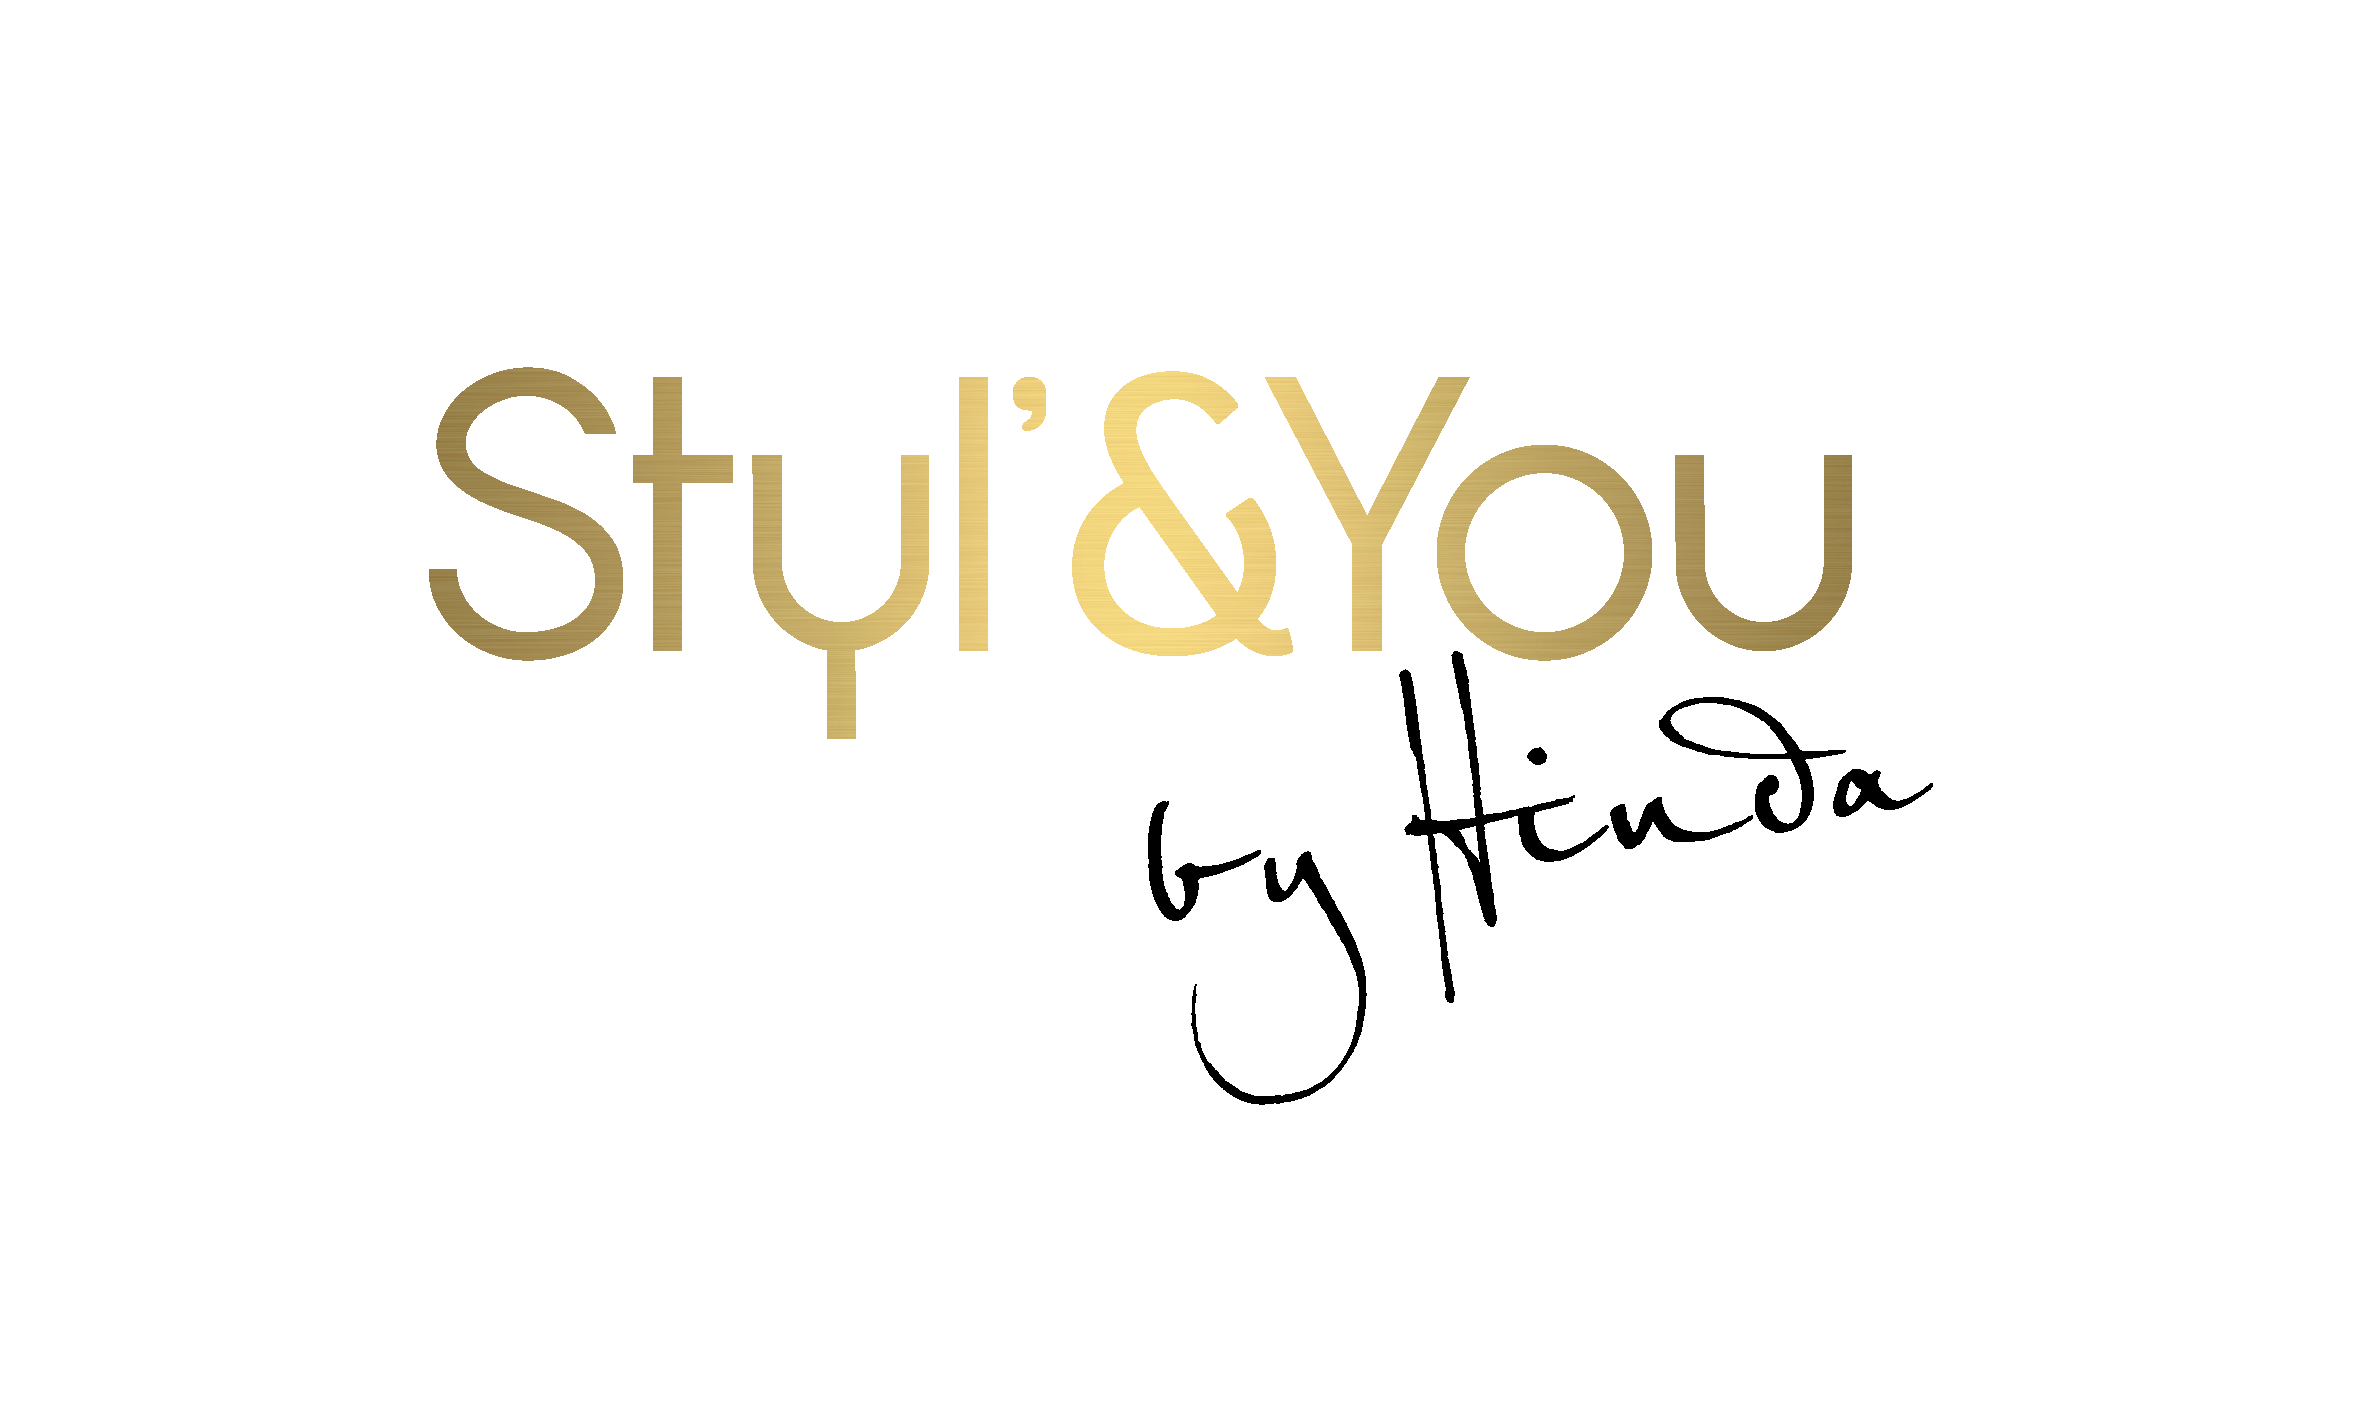 Styl&you